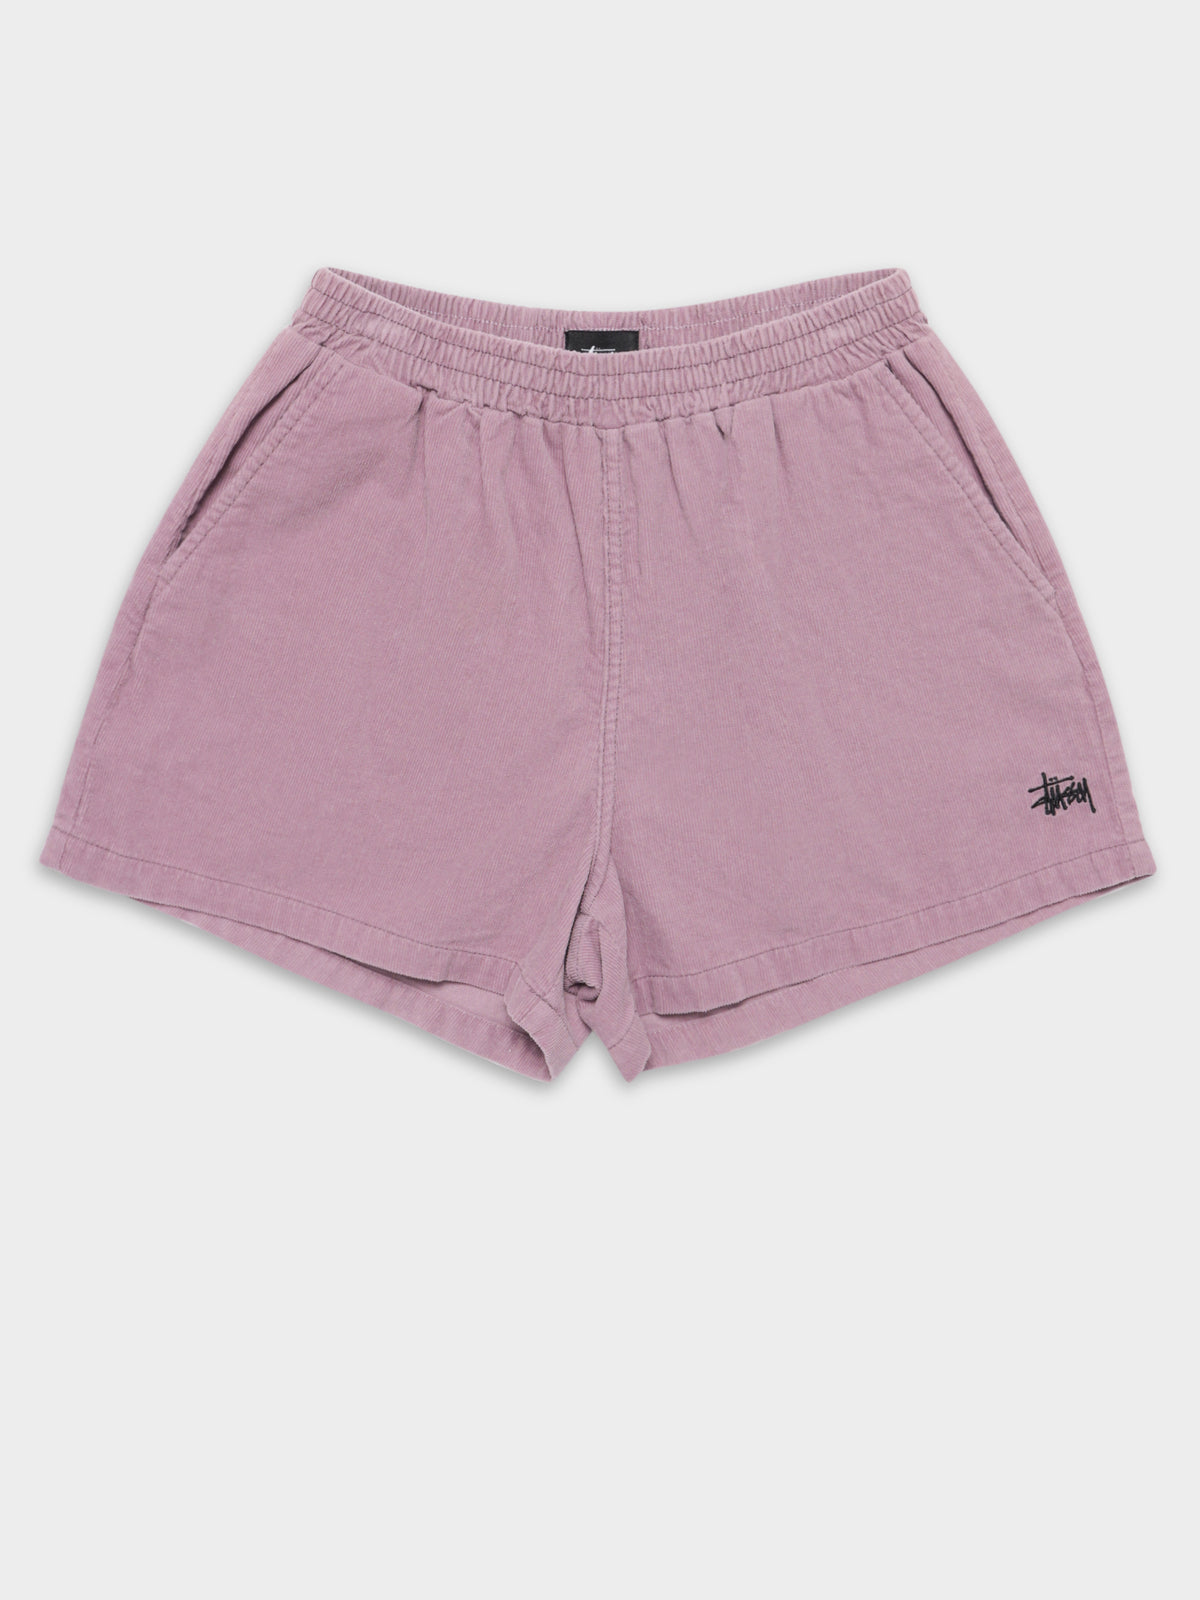 Stock Cord Shorts in Mauve